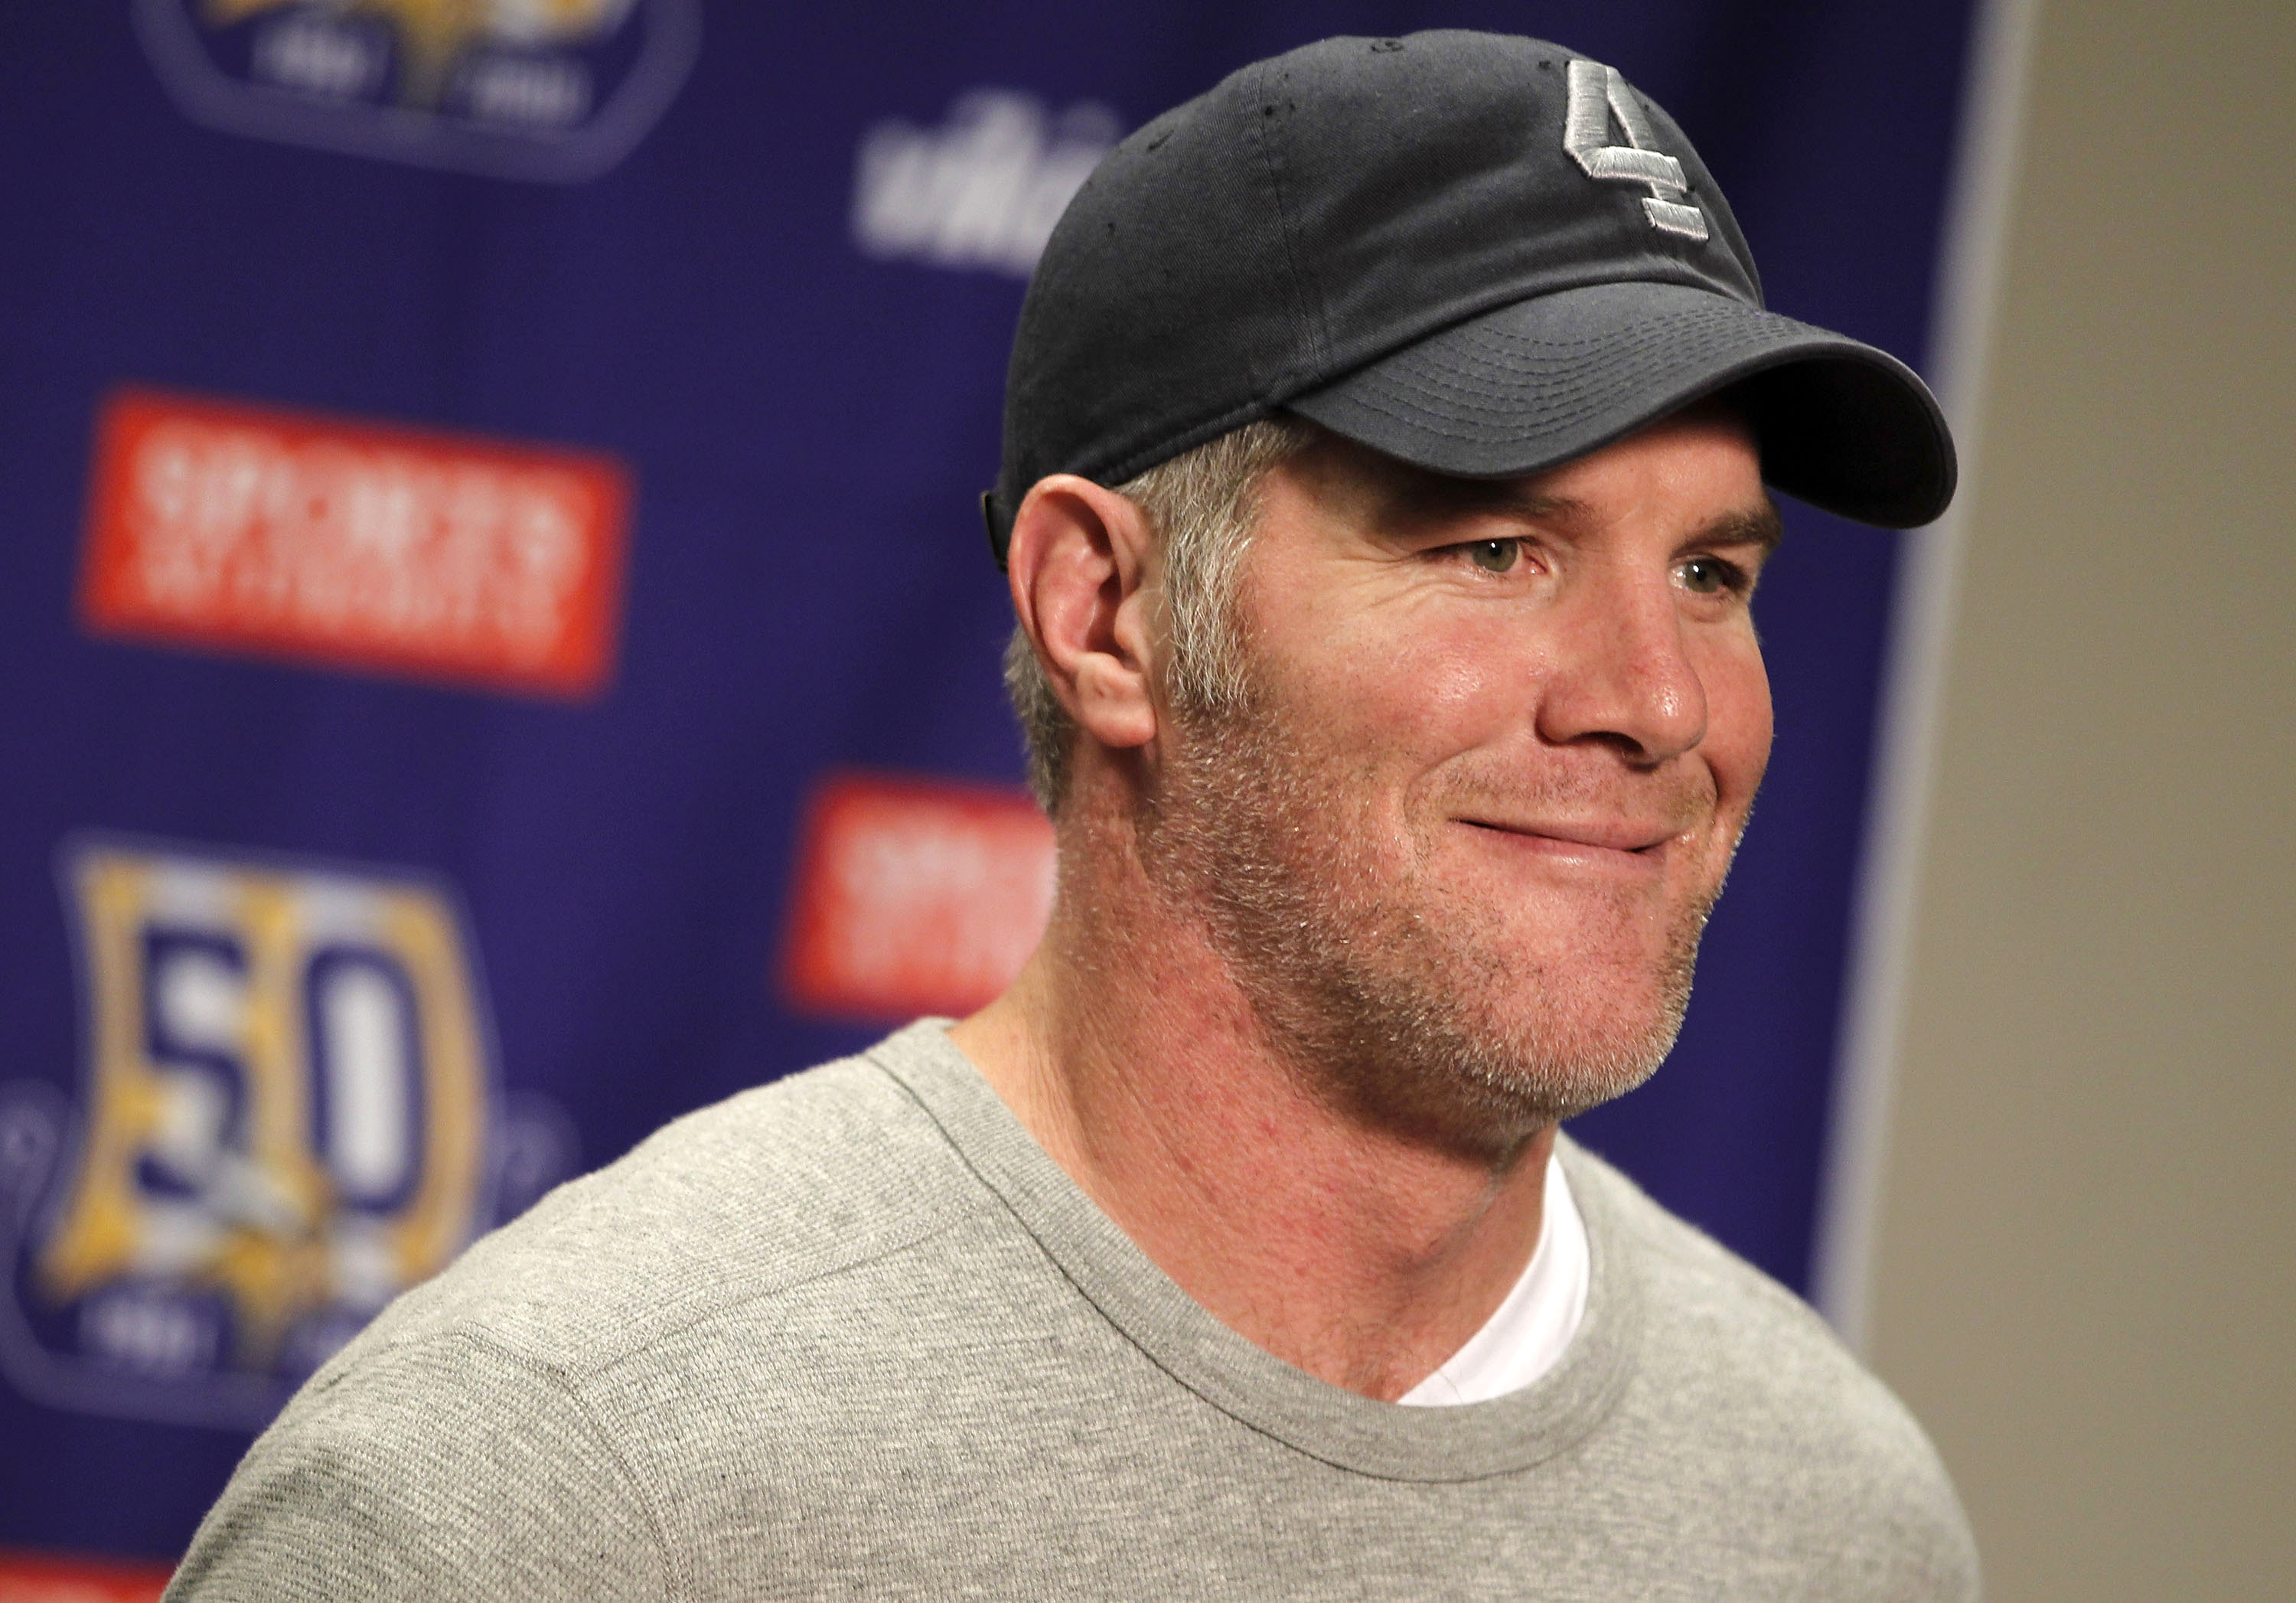 DETROIT, MI - JANUARY 02:  Brett Favre #4 of the Minnesota Vikings talks at a post game press conference after a 13-20 loss to the Detroit Lions at Ford Field on January 2, 2011 in Detroit, Michigan.  (Photo by Gregory Shamus/Getty Images)